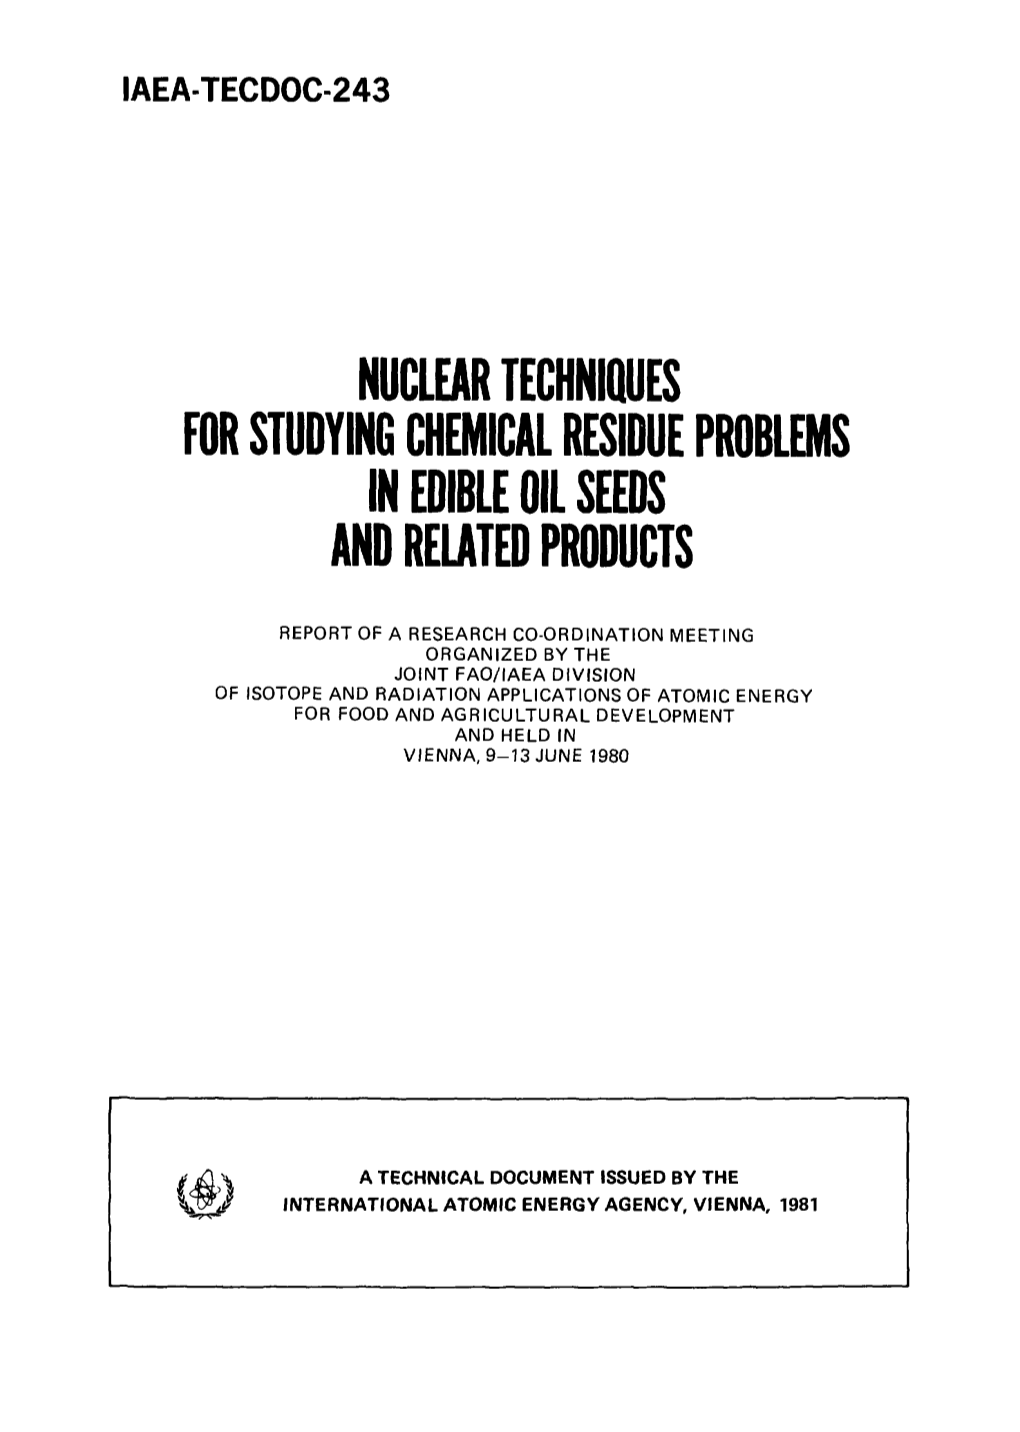 Nuclear Techniques for Studying Chemical Residue Problems in Edible Oil Seeds and Related Products